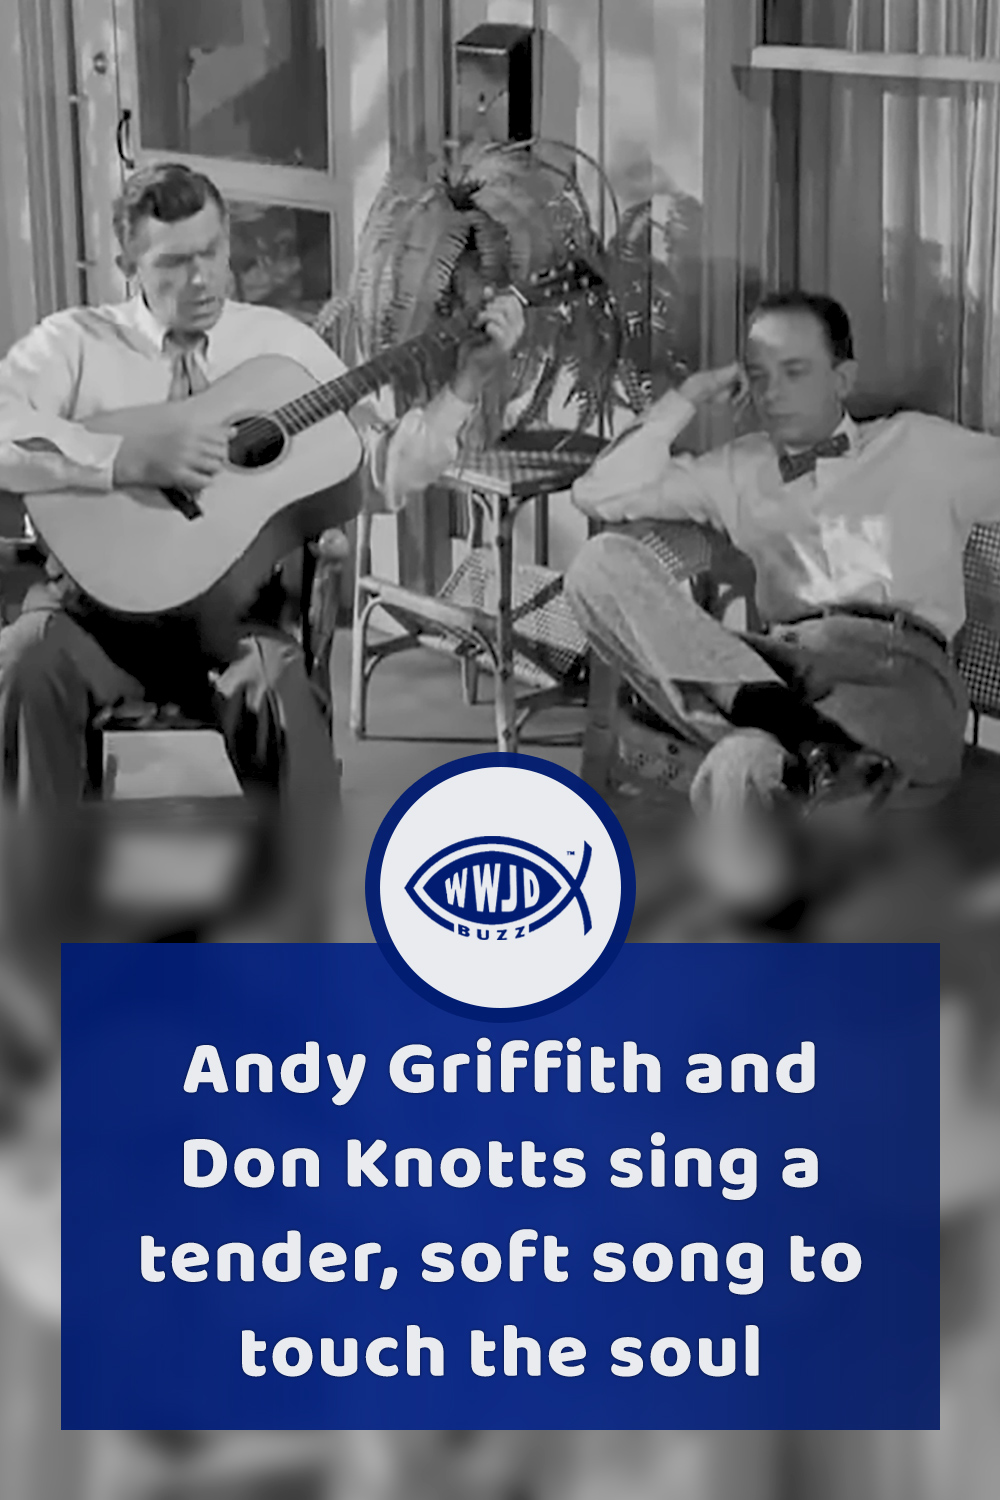 Andy Griffith and Don Knotts sing a tender, soft song to touch the soul